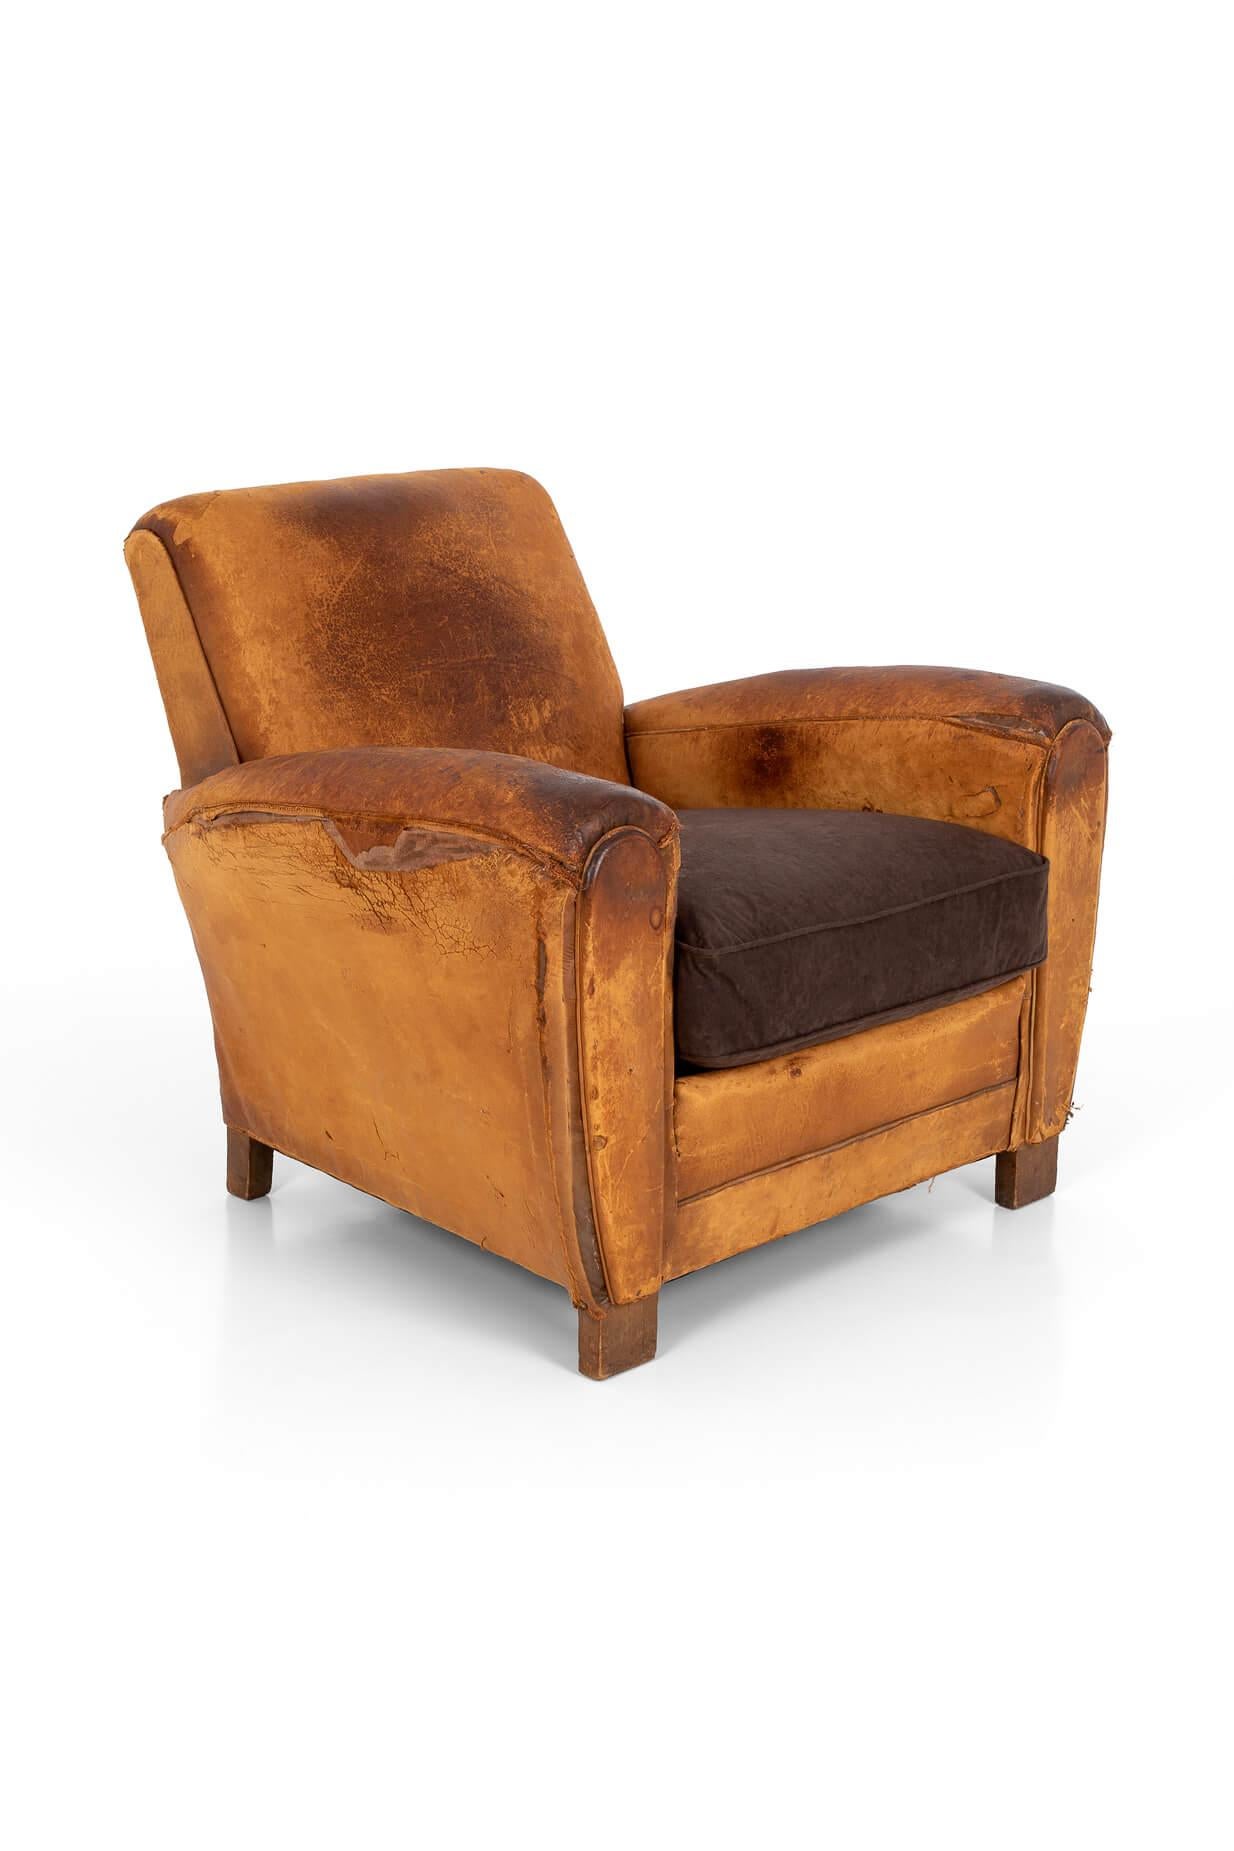 A superb distressed Art Deco club chair in a rich tan leather. Square back on oak frame with scrolling arms. Fully reconditioned coil sprung seat with a new dark brown suede feature cushion. 

French, circa 1930.

Additional